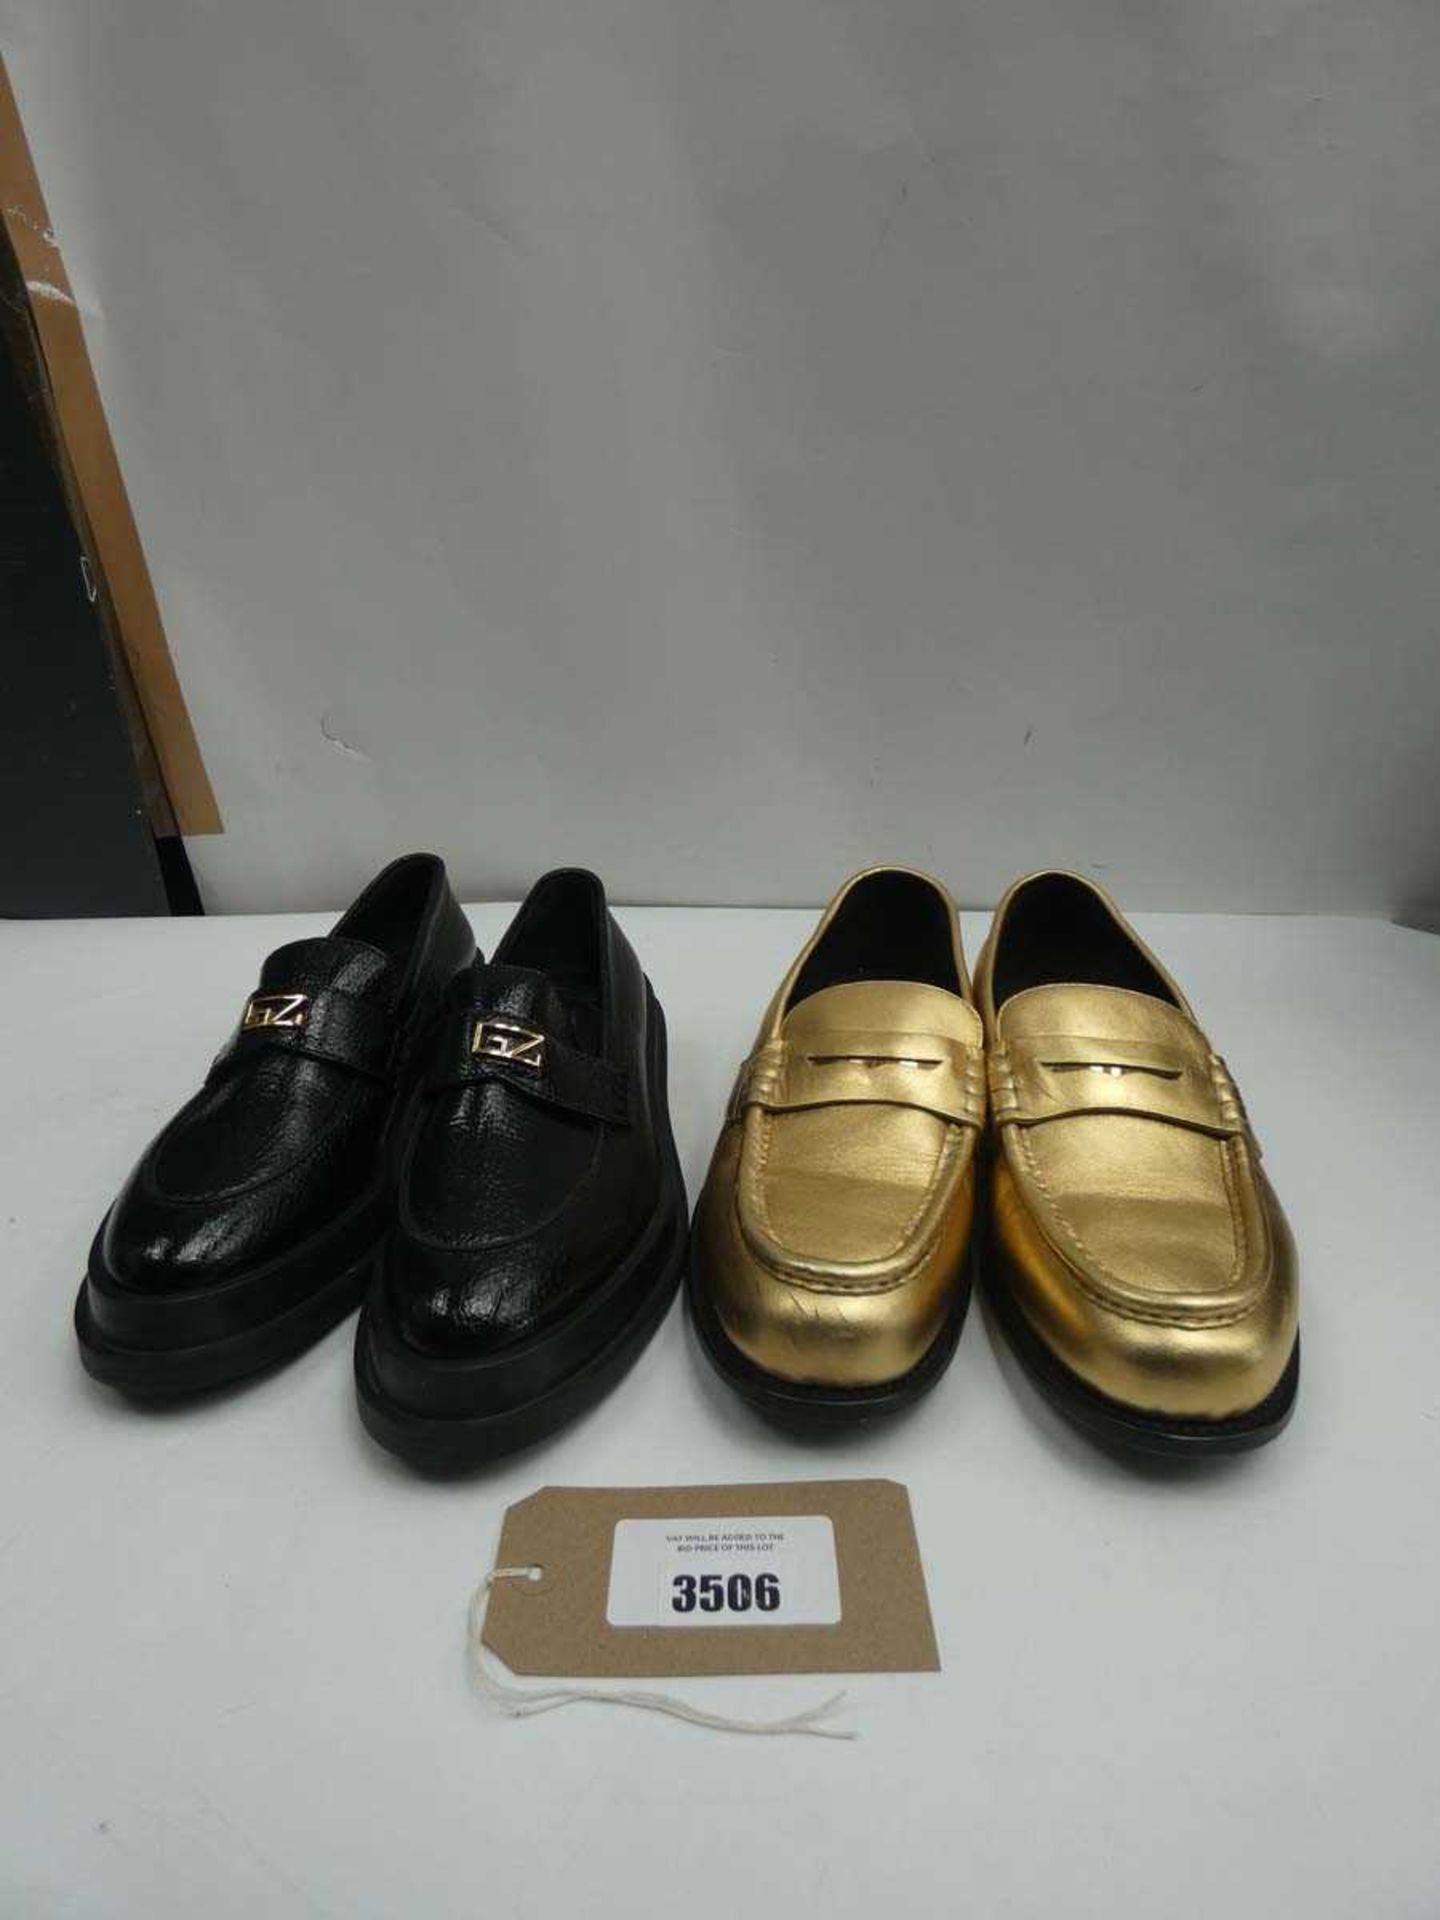 +VAT 2 pairs of Giuseppe Zanotti loafers size EU 40 and 44 (used)